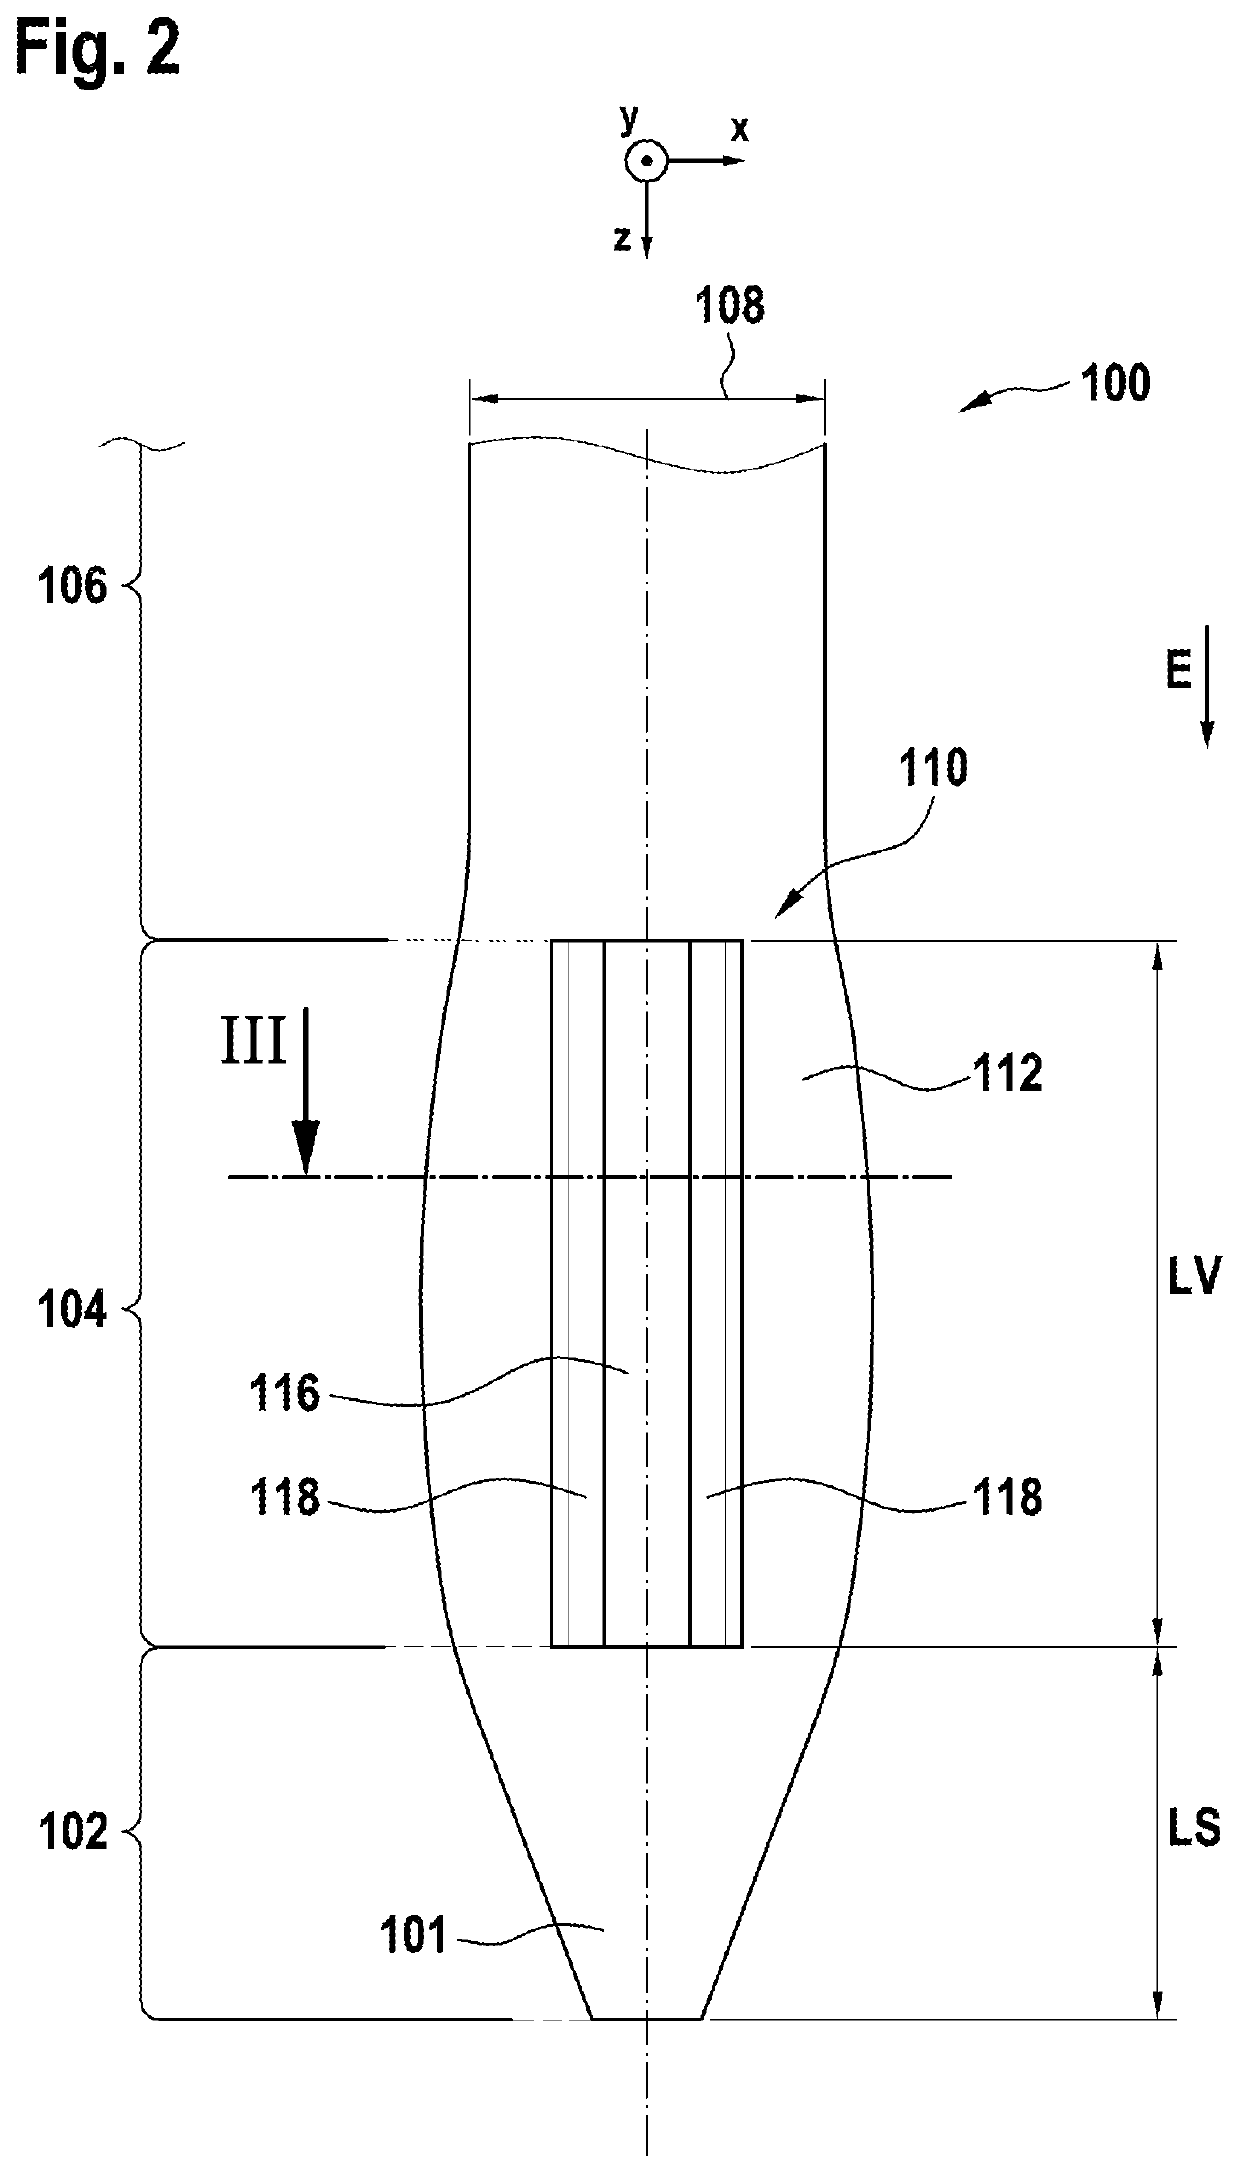 Contact pin for pressing into a printed circuit board and contact arrangement